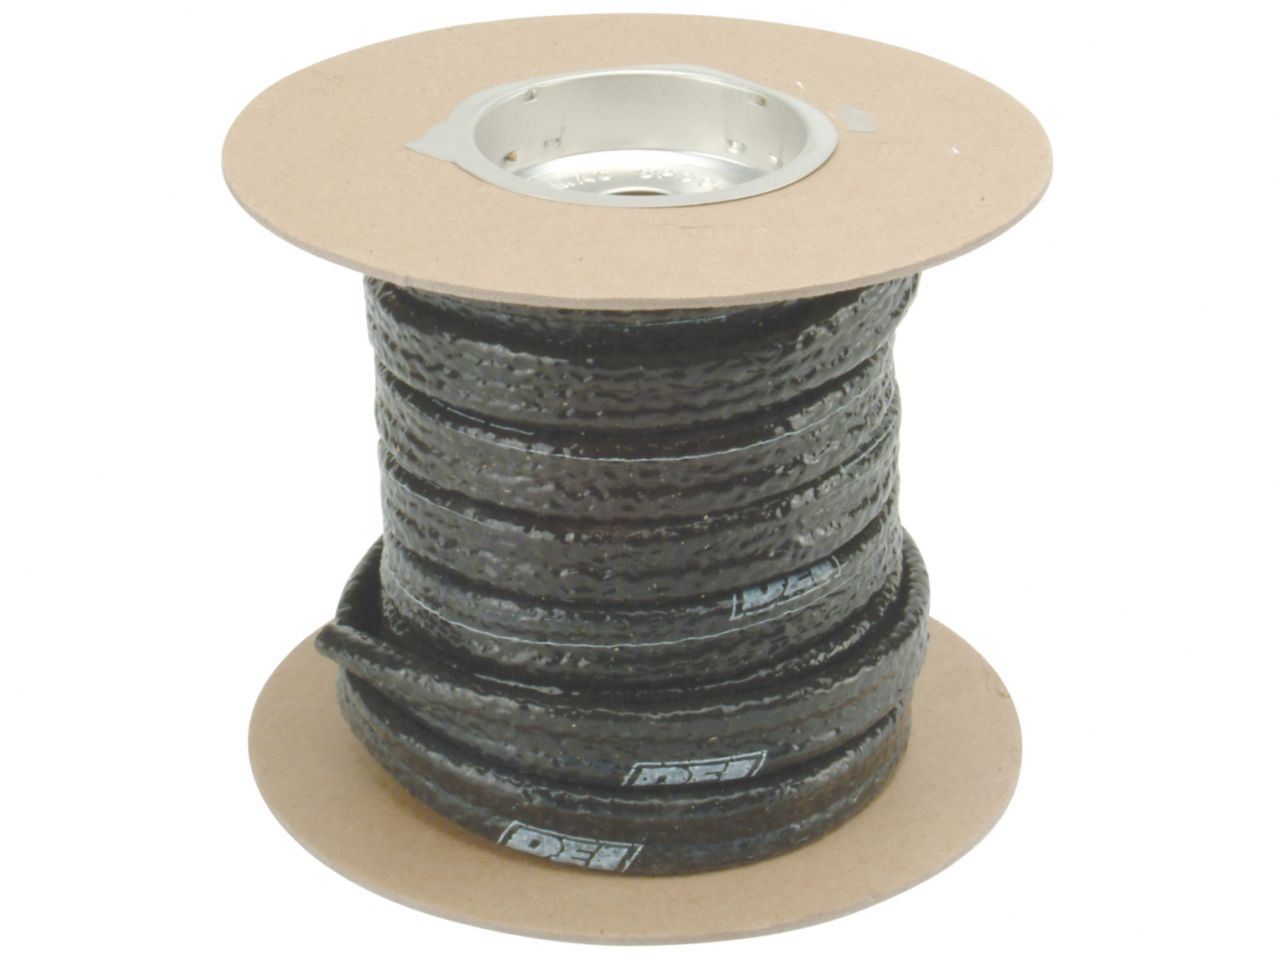 DEI Fire Sleeve and Tape Kit - 3/8" I.D. x 36"